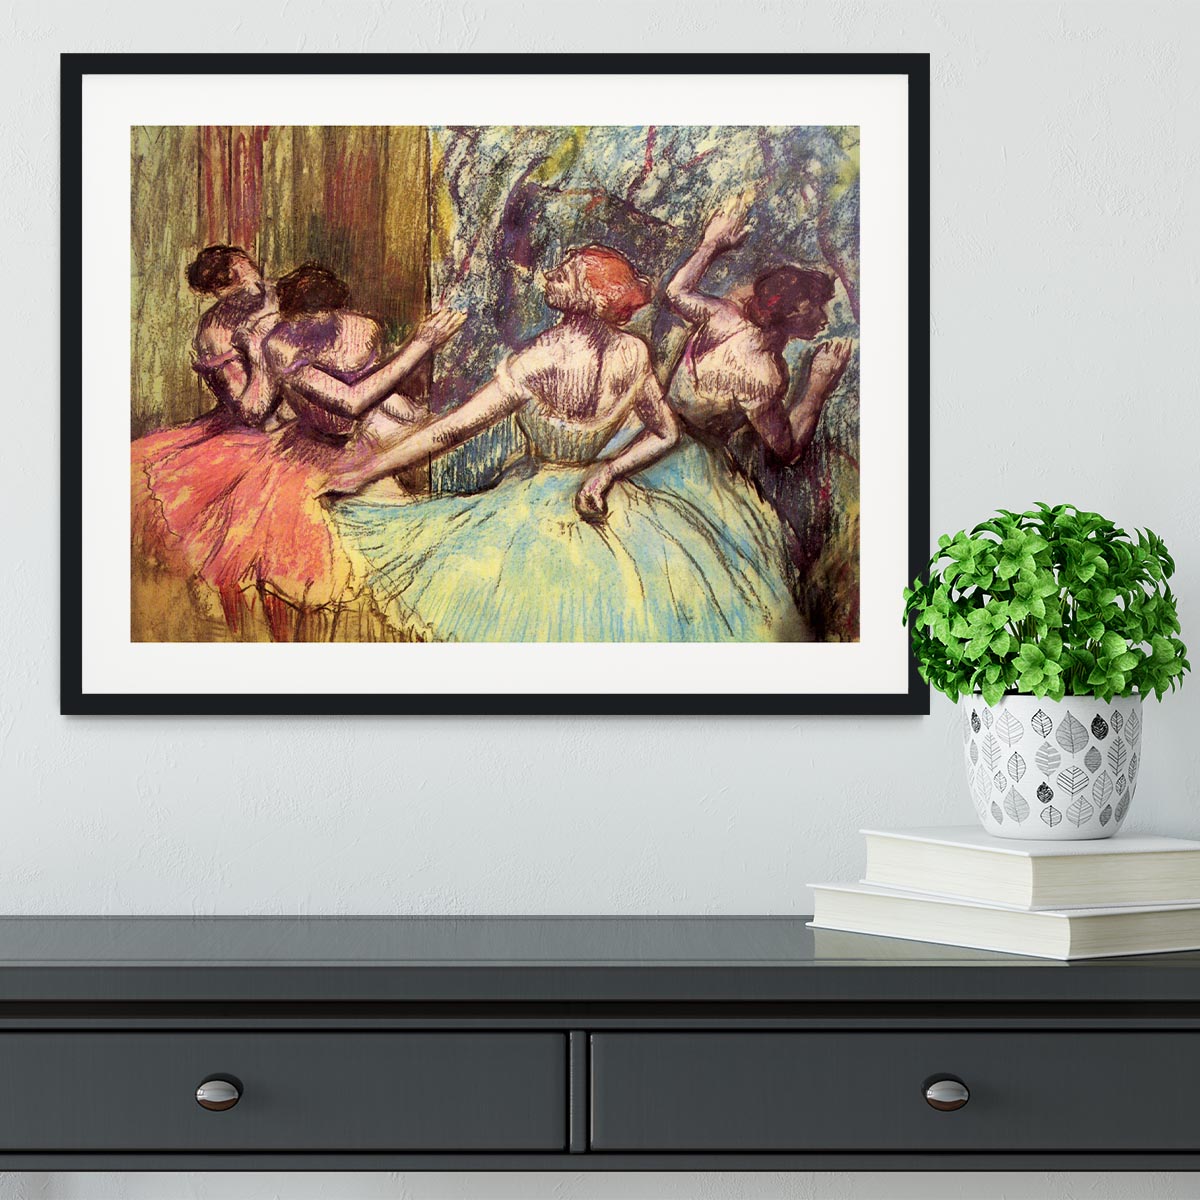 Four dancers behind the scenes 2 by Degas Framed Print - Canvas Art Rocks - 1